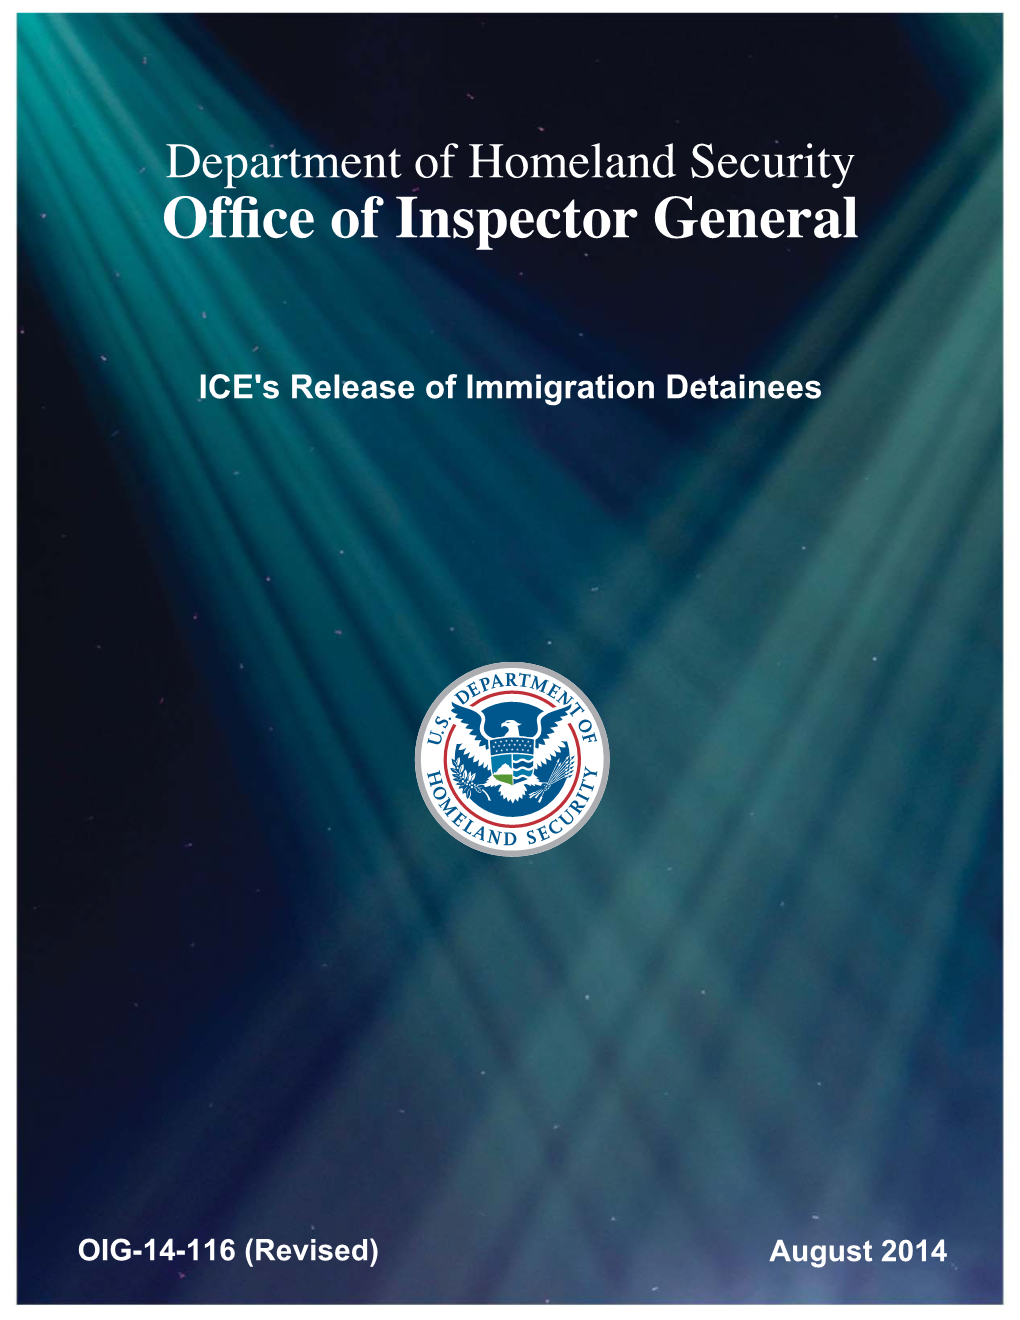 OIG-11-116 ICE's Release of Immigration Detainees